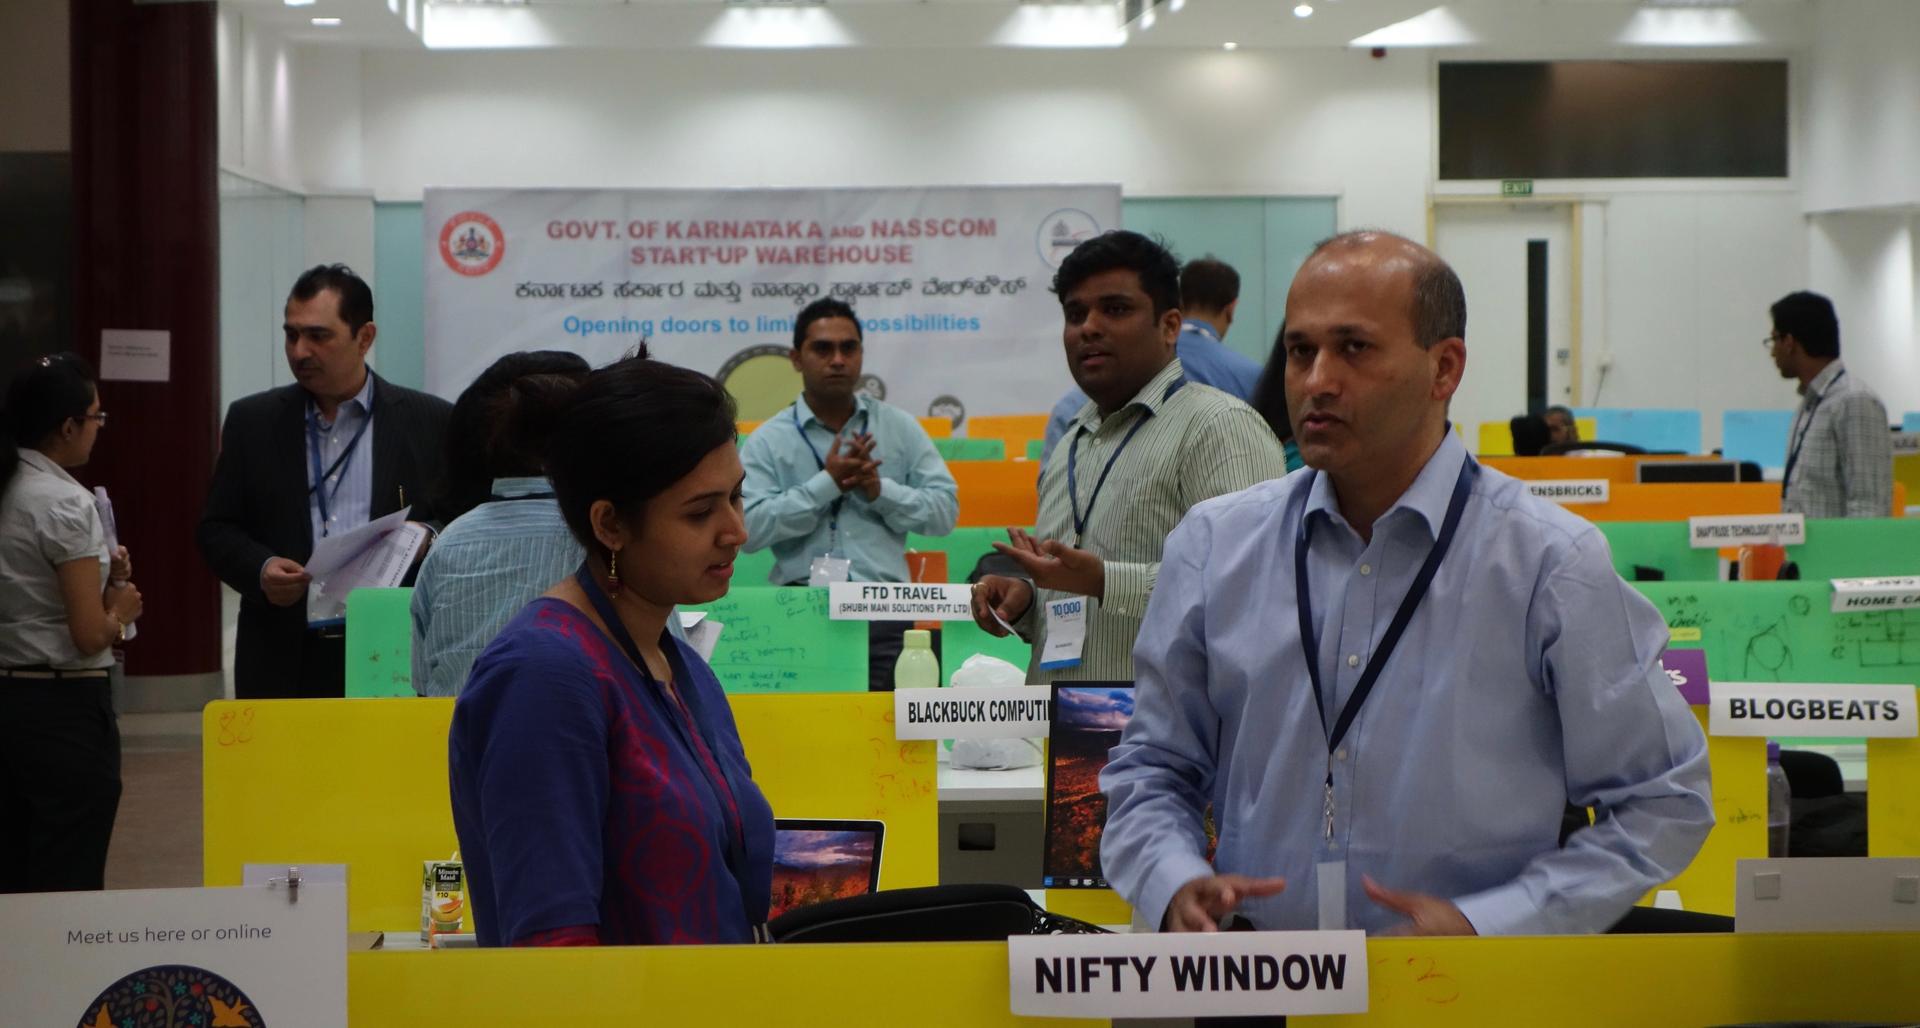 Indian startup entrepreneurs pitch their ideas to potential investors at the Startup Warehouse in Bangalore 